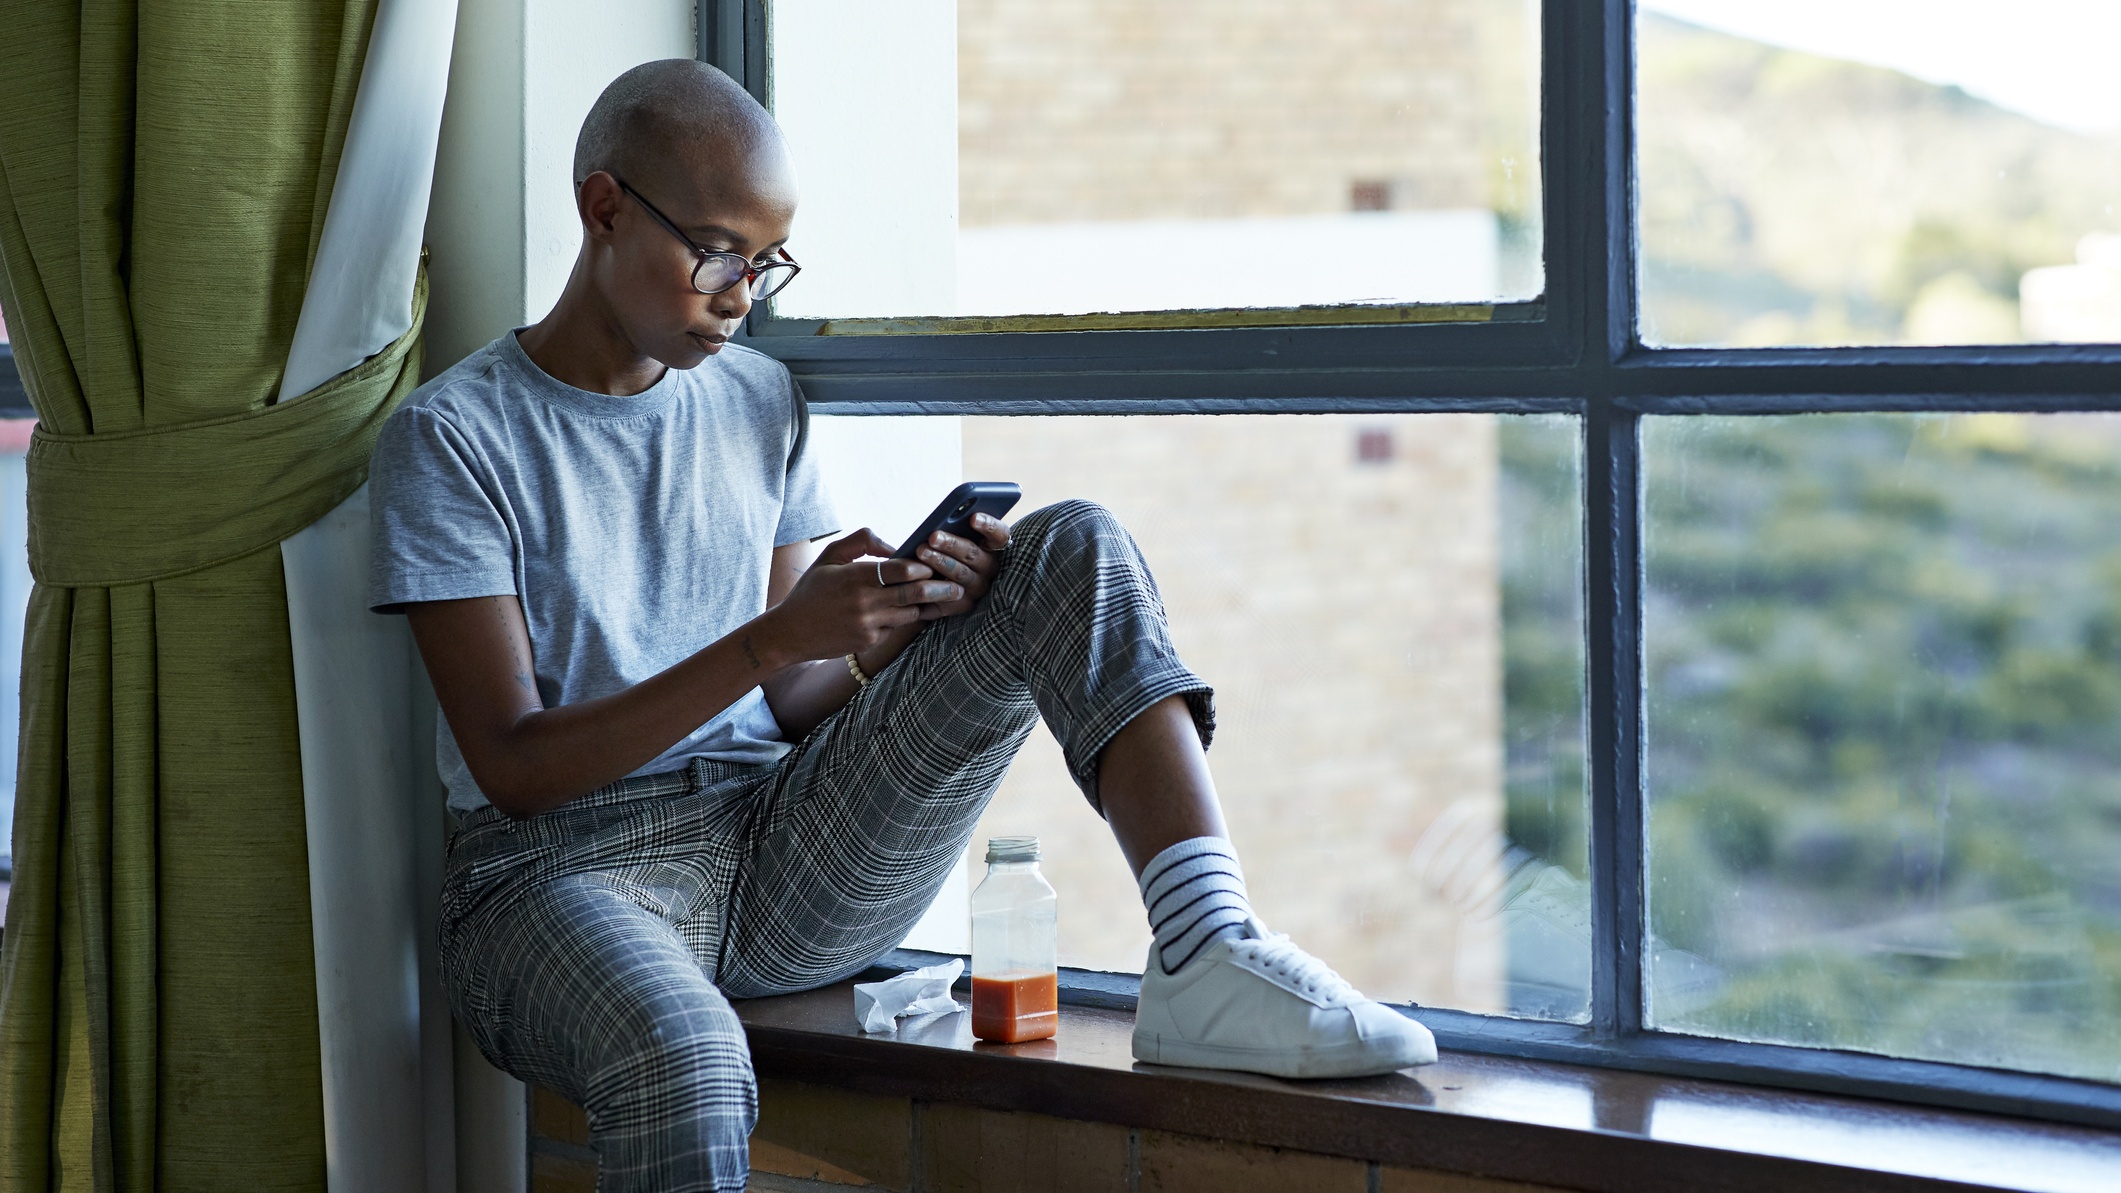 How One App Is Helping Black Women Find Culturally Competent Care